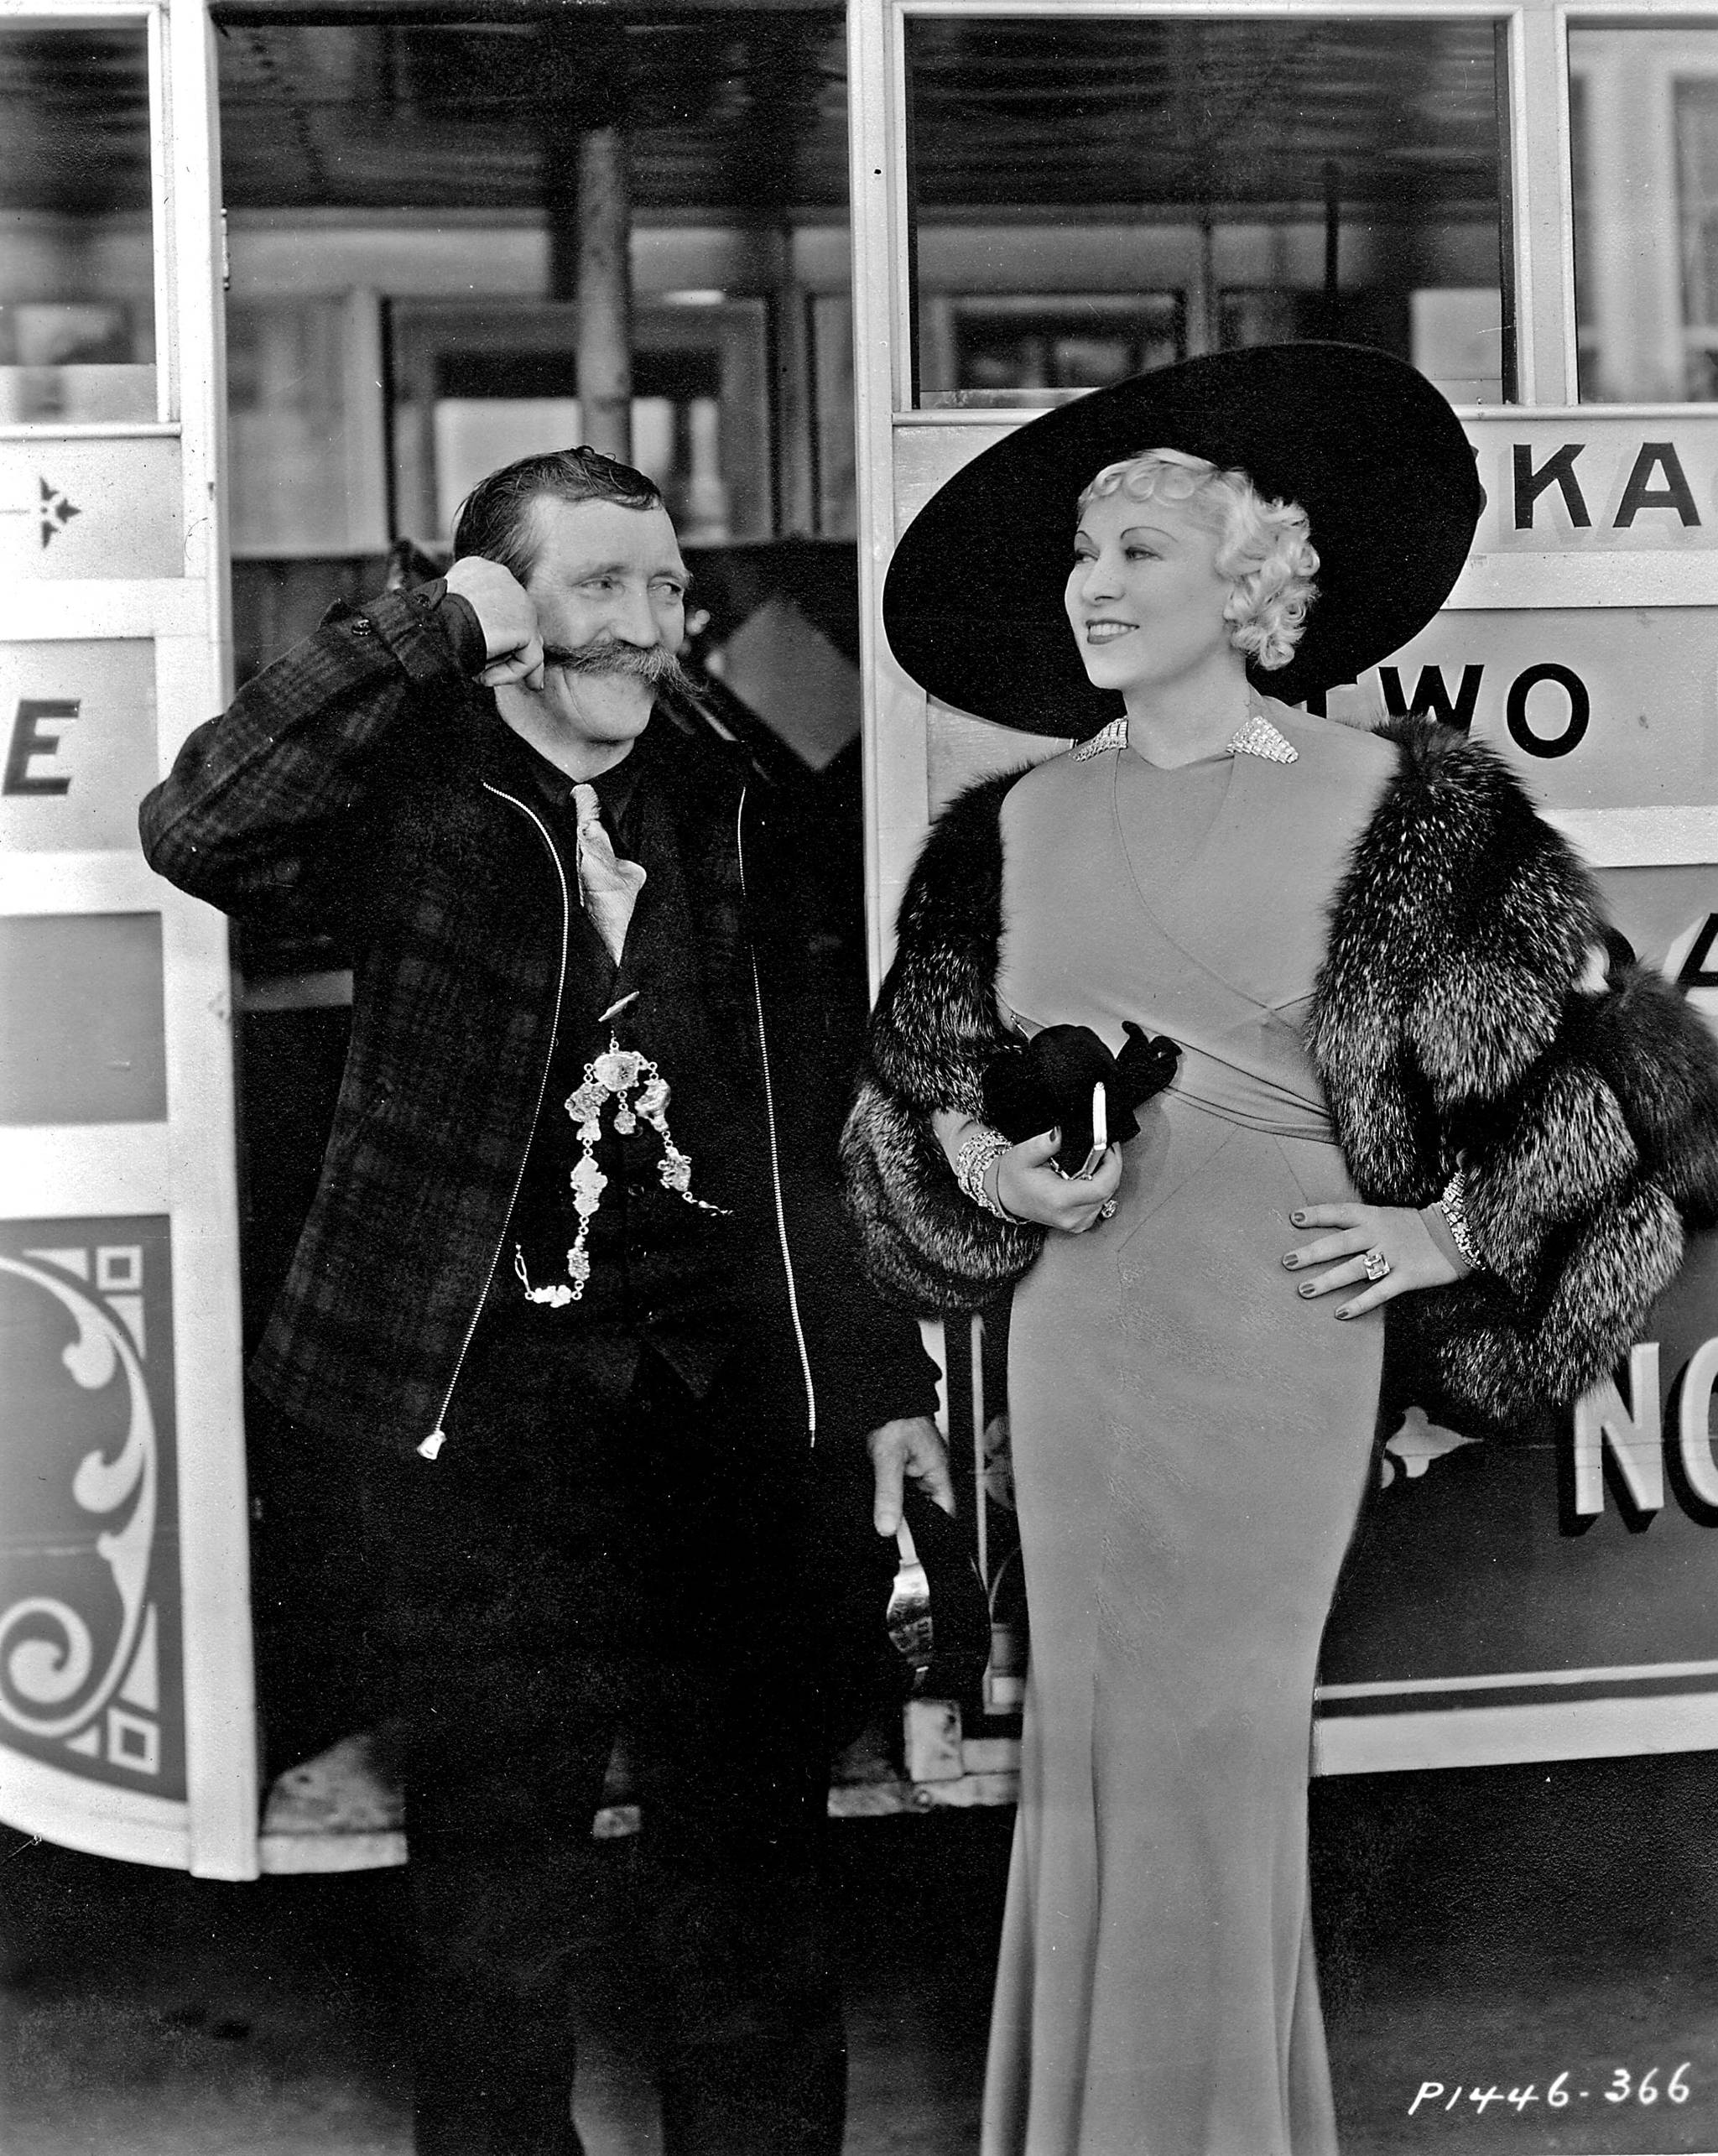 Martin Itjen and Mae West beside Itjen’s Skaguay Street Car Number 2 in Hollywood, California, in Feb. 27, 1935. Image courtesy of the Klondike Gold Rush National Historical Park, George & Edna Rapuzzi Collection, KLGO 55772.